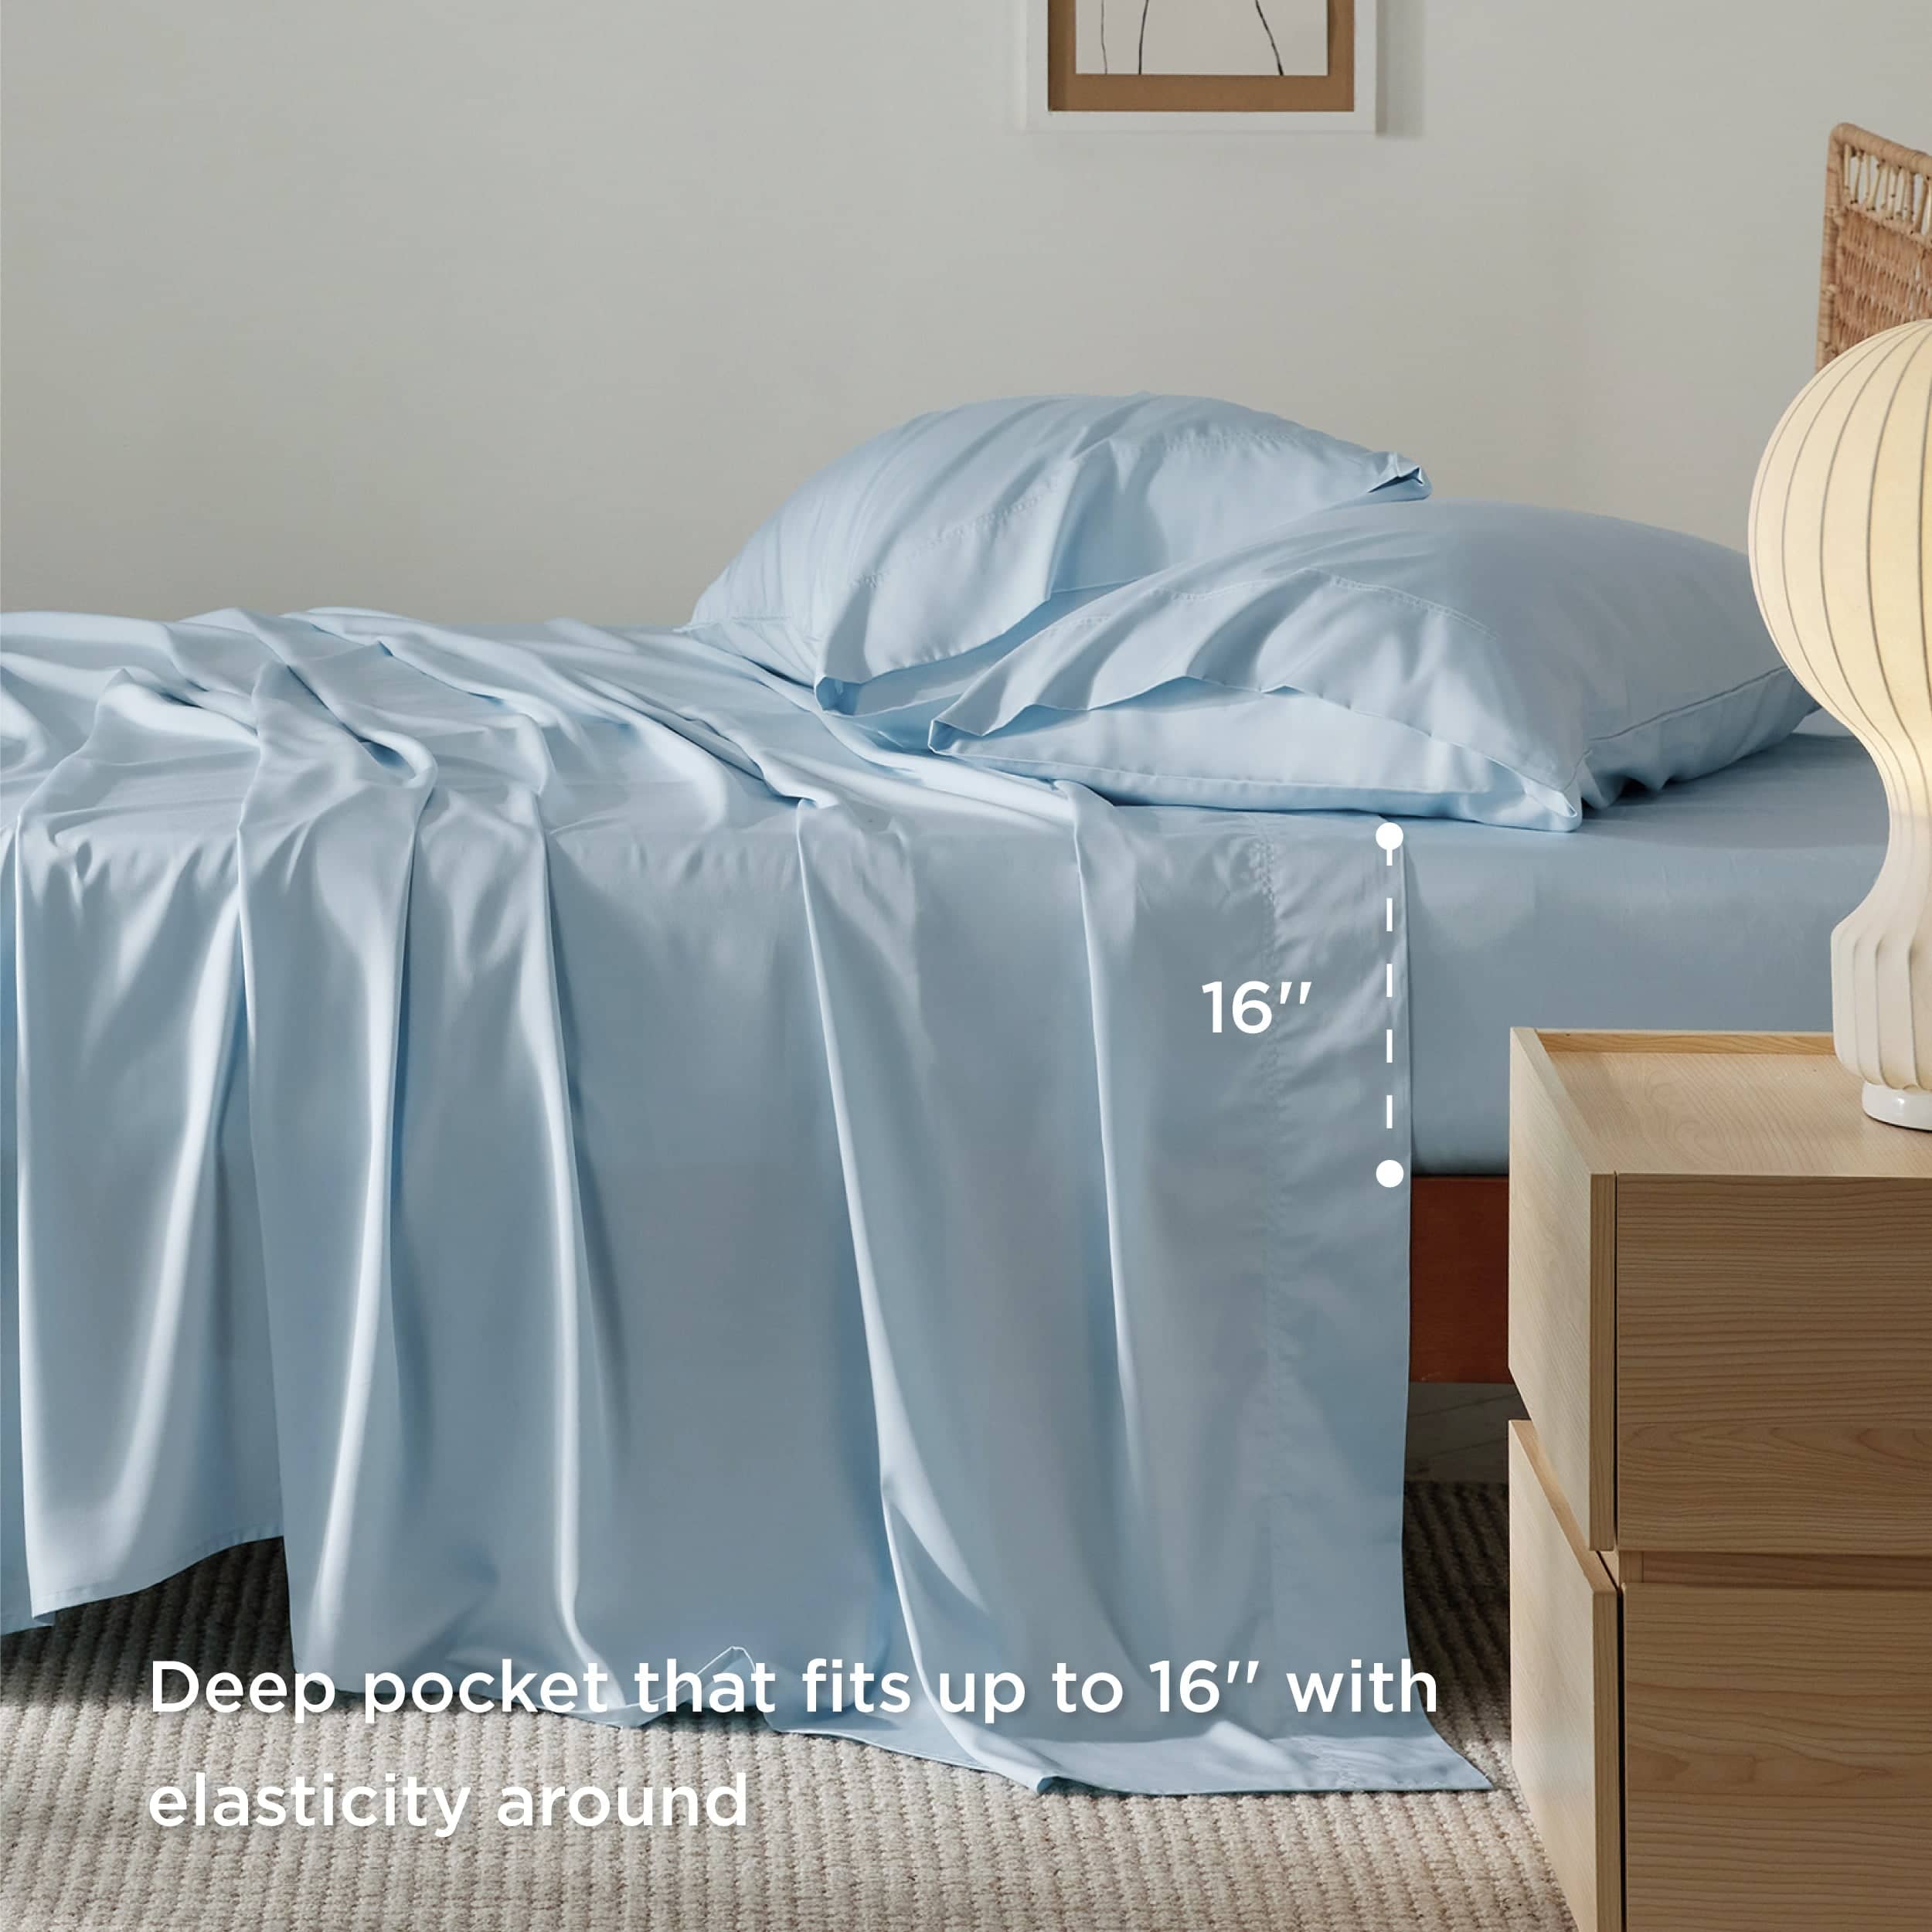 Bedsure Queen Sheets, Rayon Derived from Bamboo, Queen Cooling Sheet Set, Deep Pocket Up to 16, Breathable & Soft Bed Sheets, Hotel Luxury Silky